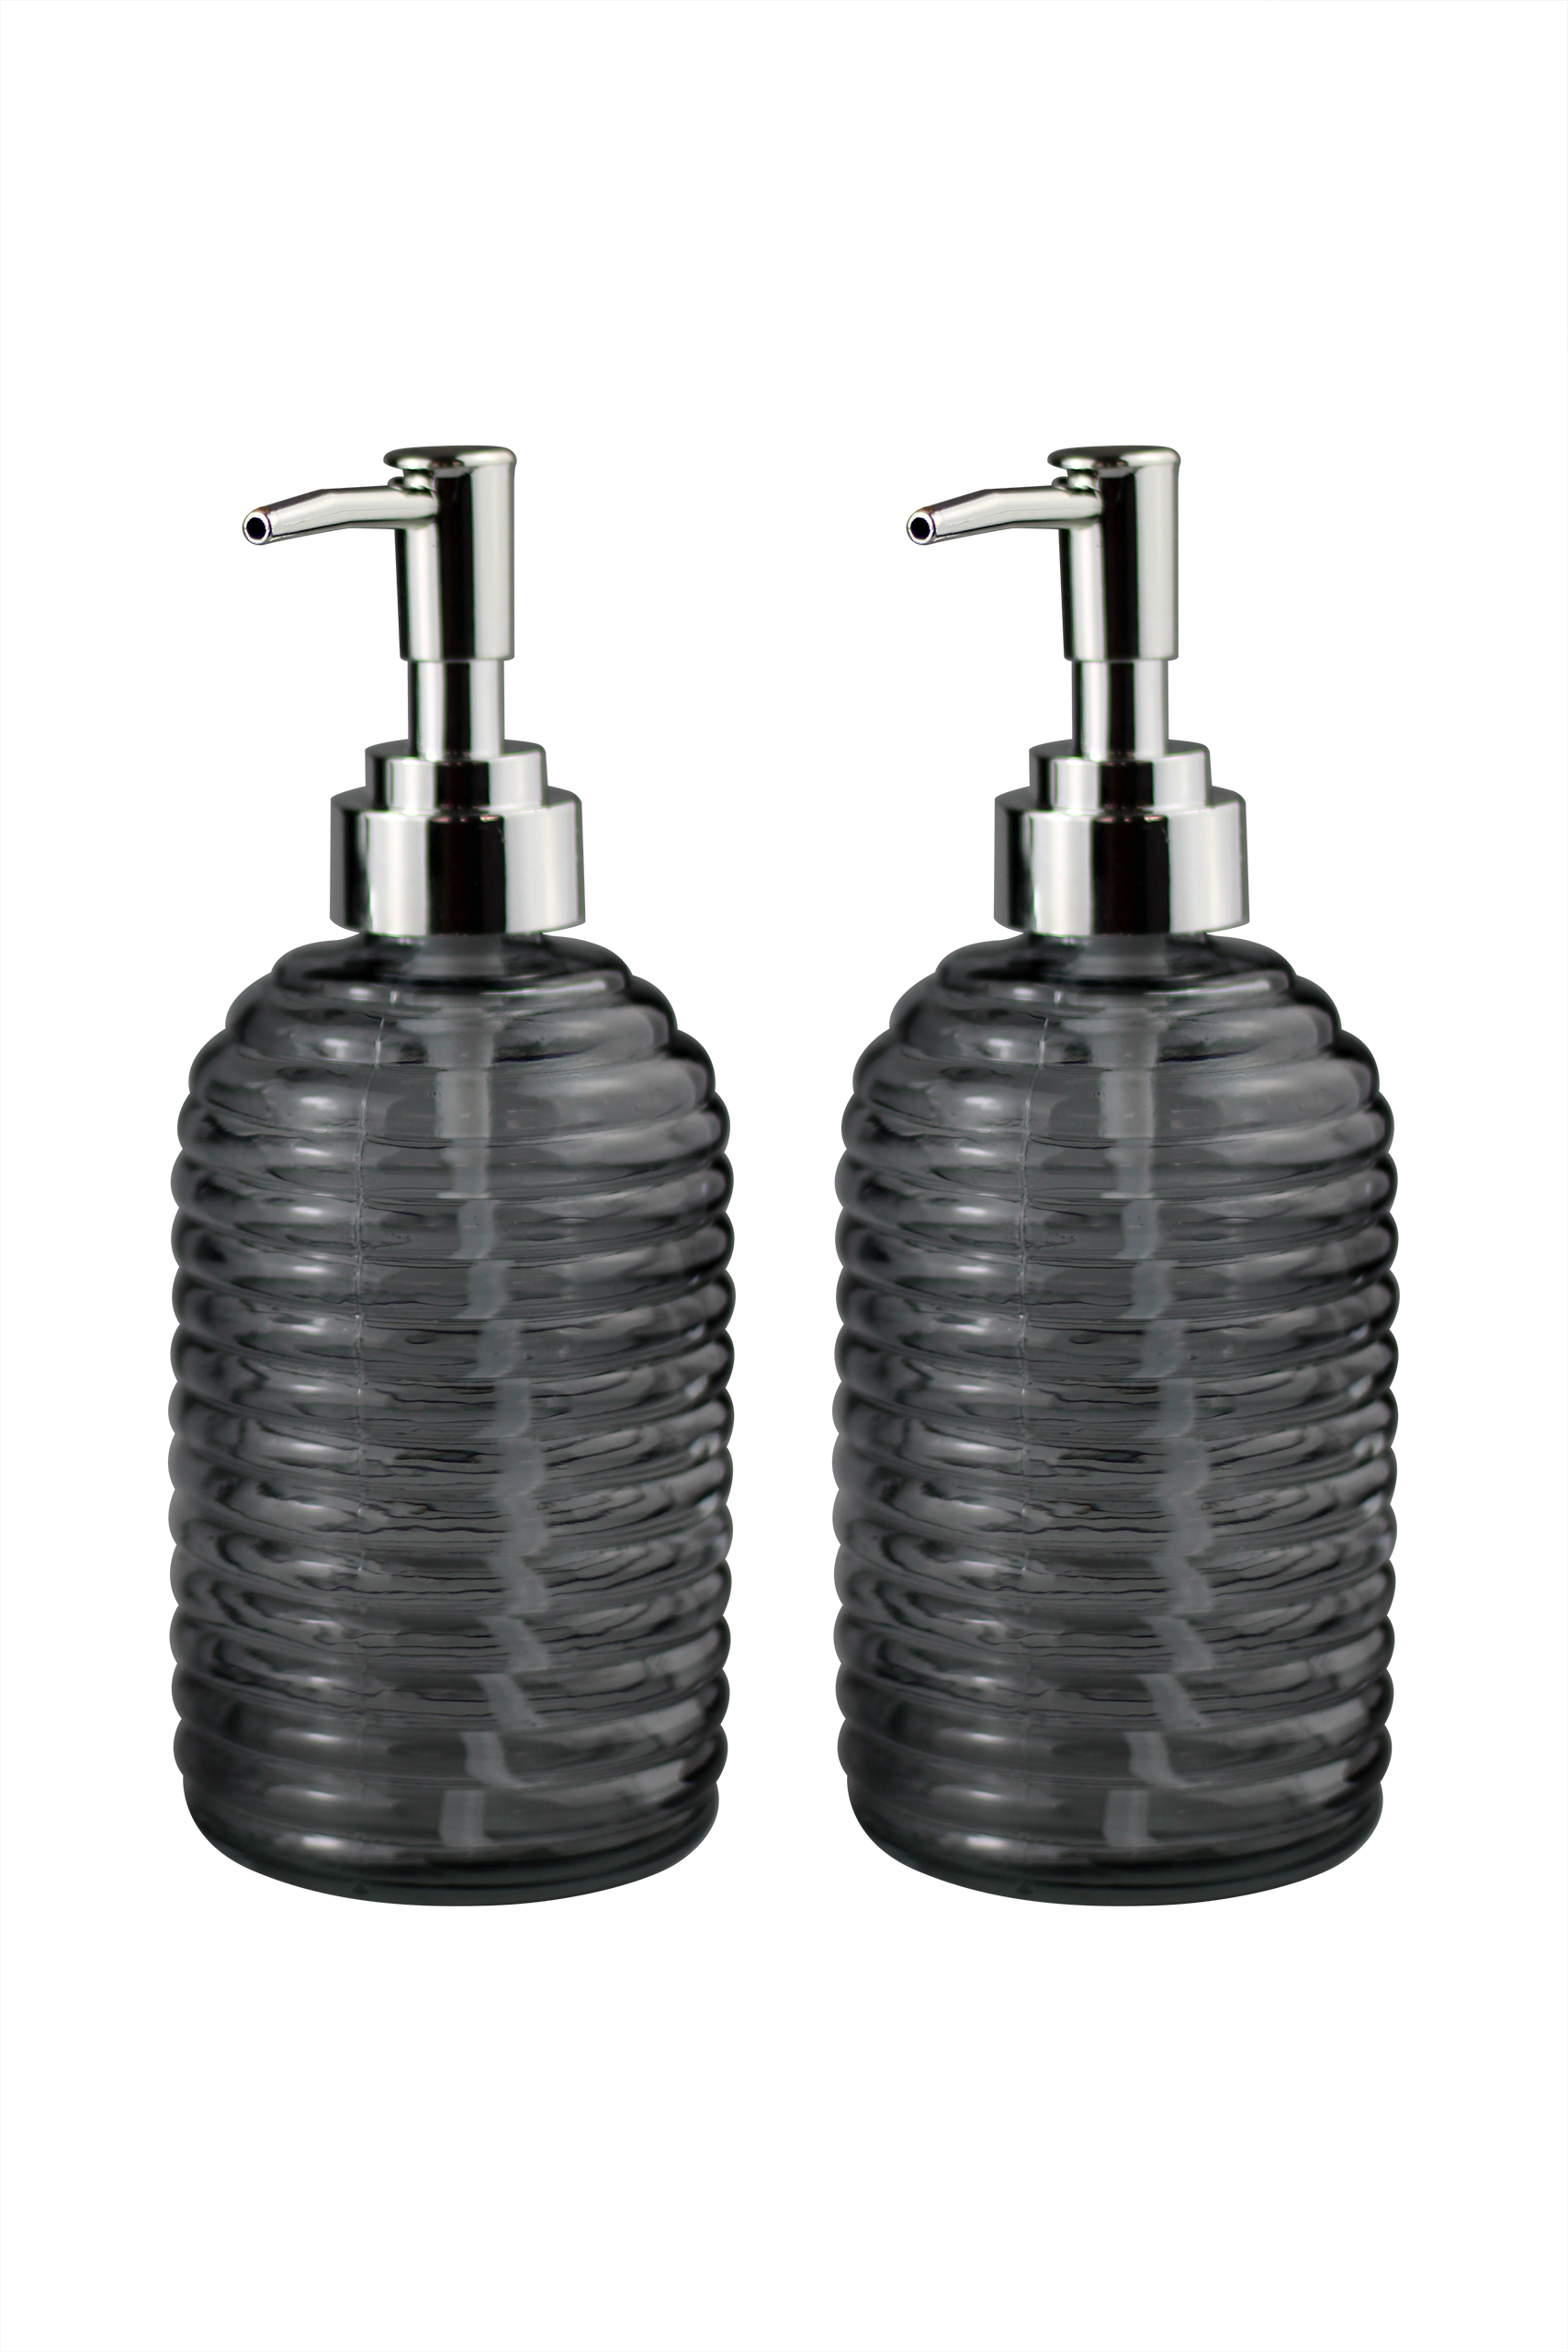 Smoked Rippled Glass Soap Dispensers - Silver Pump | Pretty Little Home